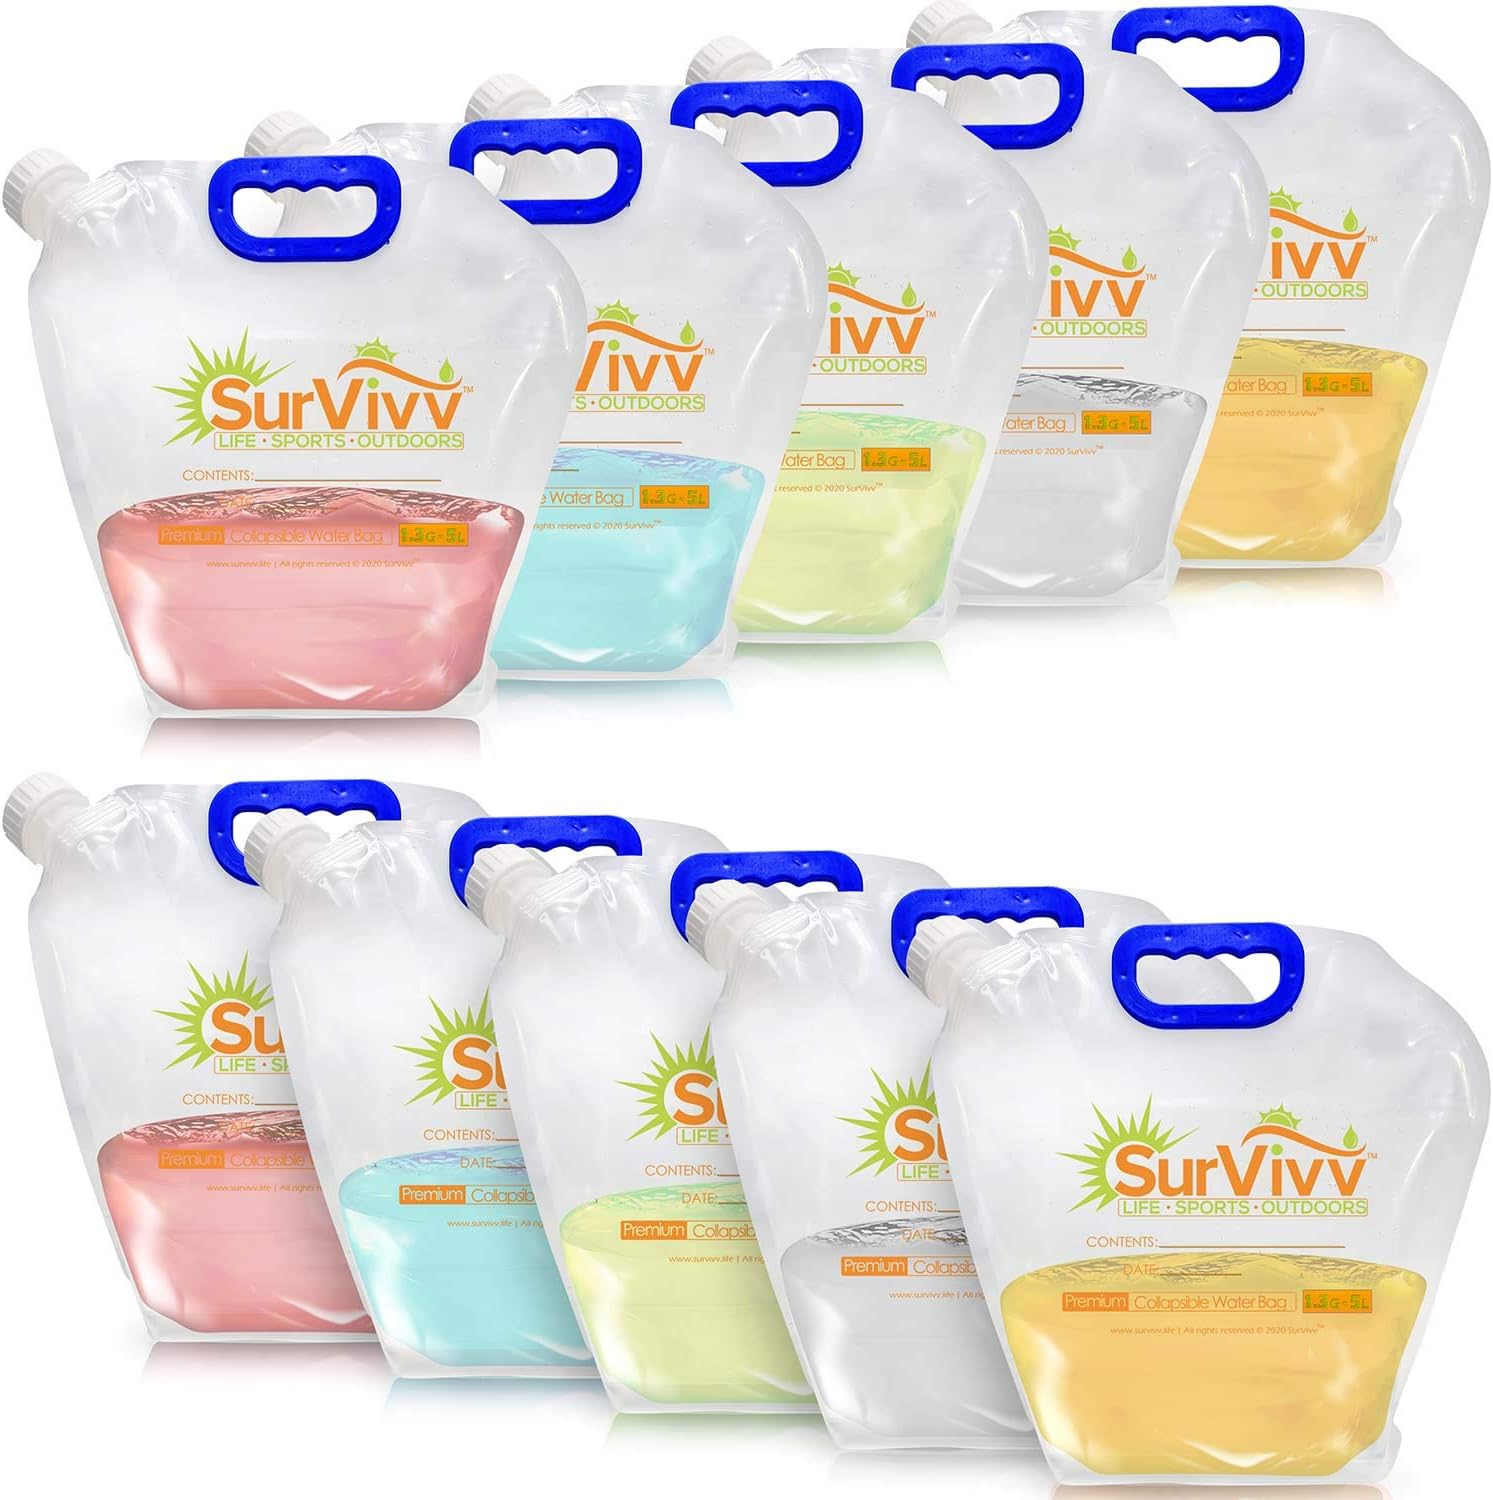 Collapsible Emergency Water Jug Container Bag 1.3Gallon/5L--4 packs